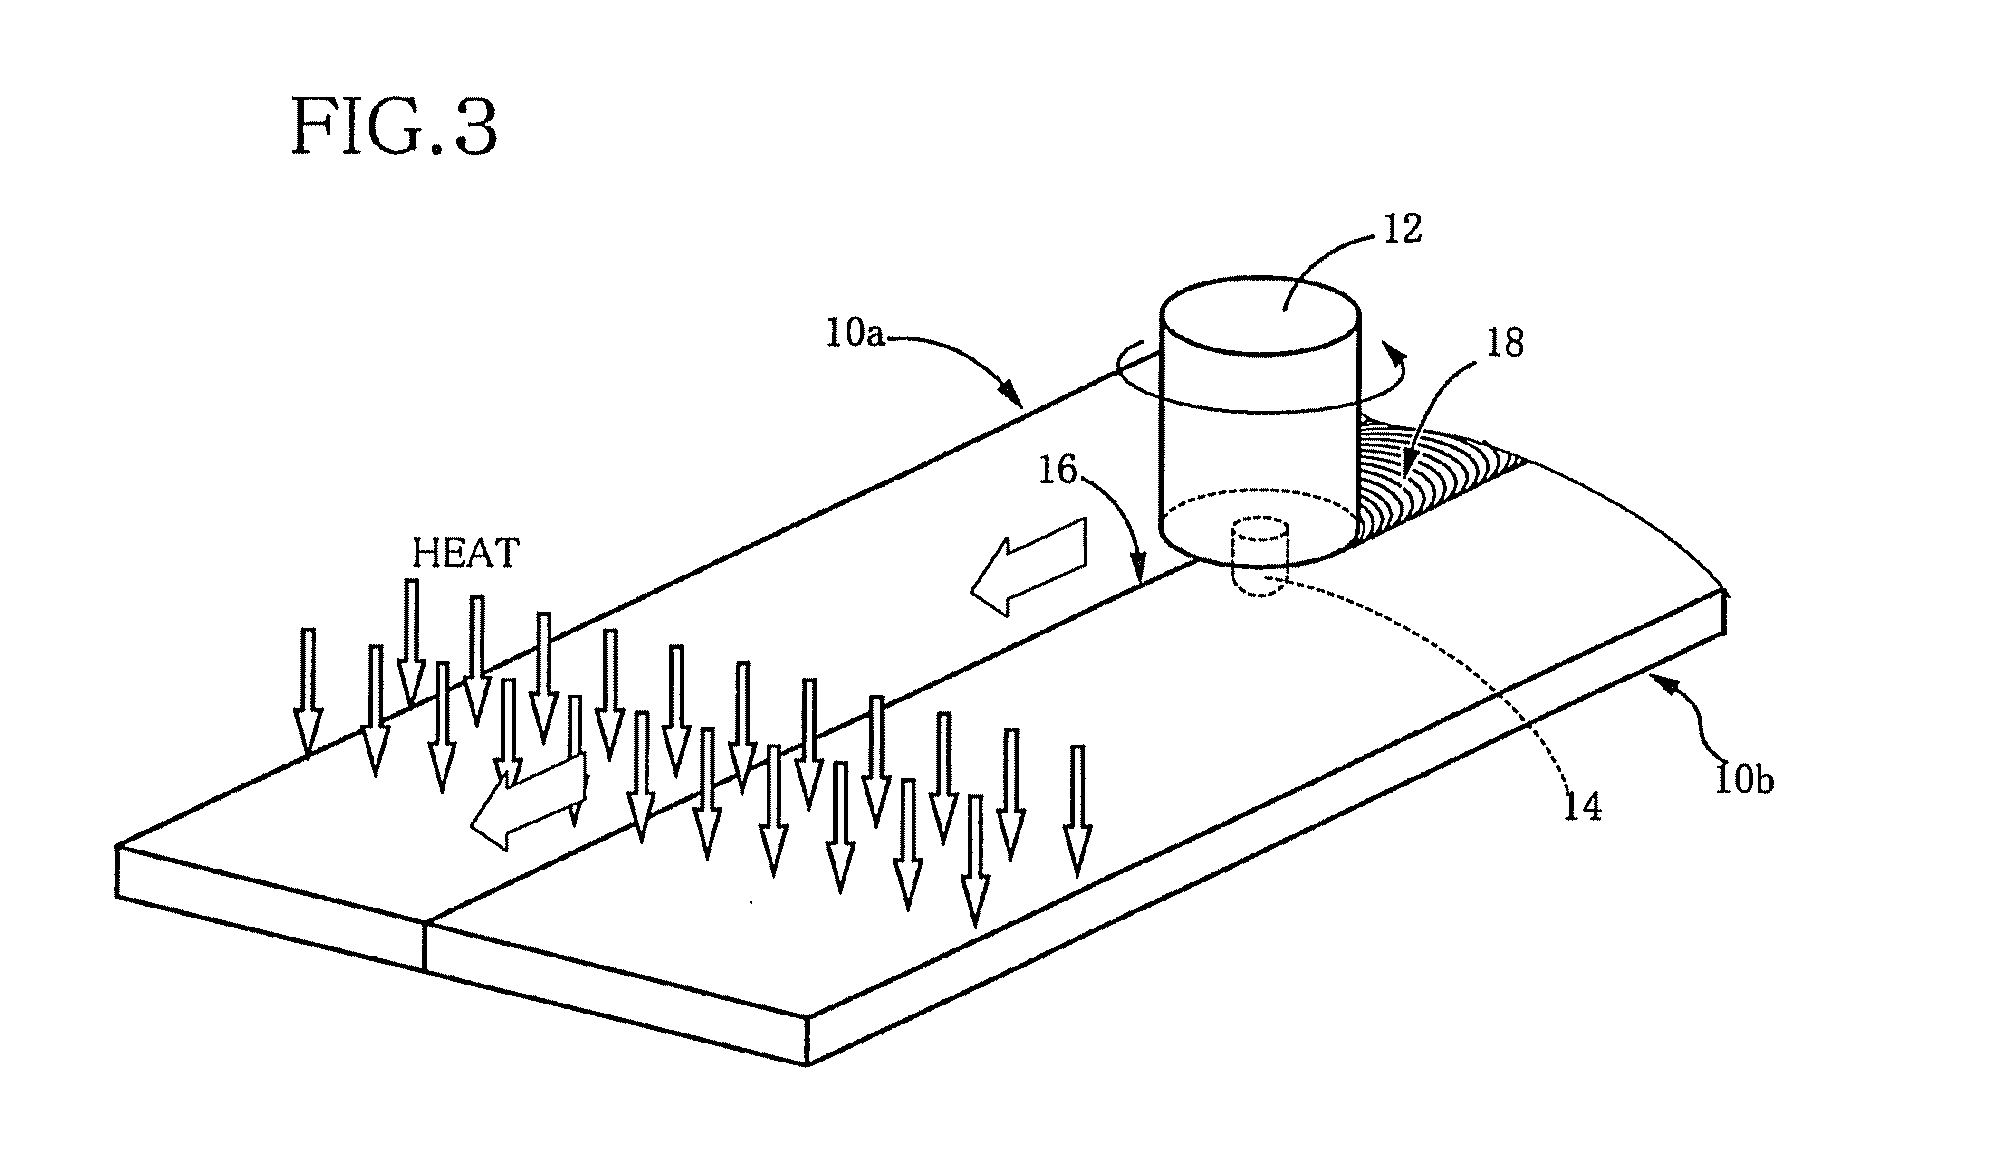 Method of joining heat-treatable aluminum alloy members by friction stir welding